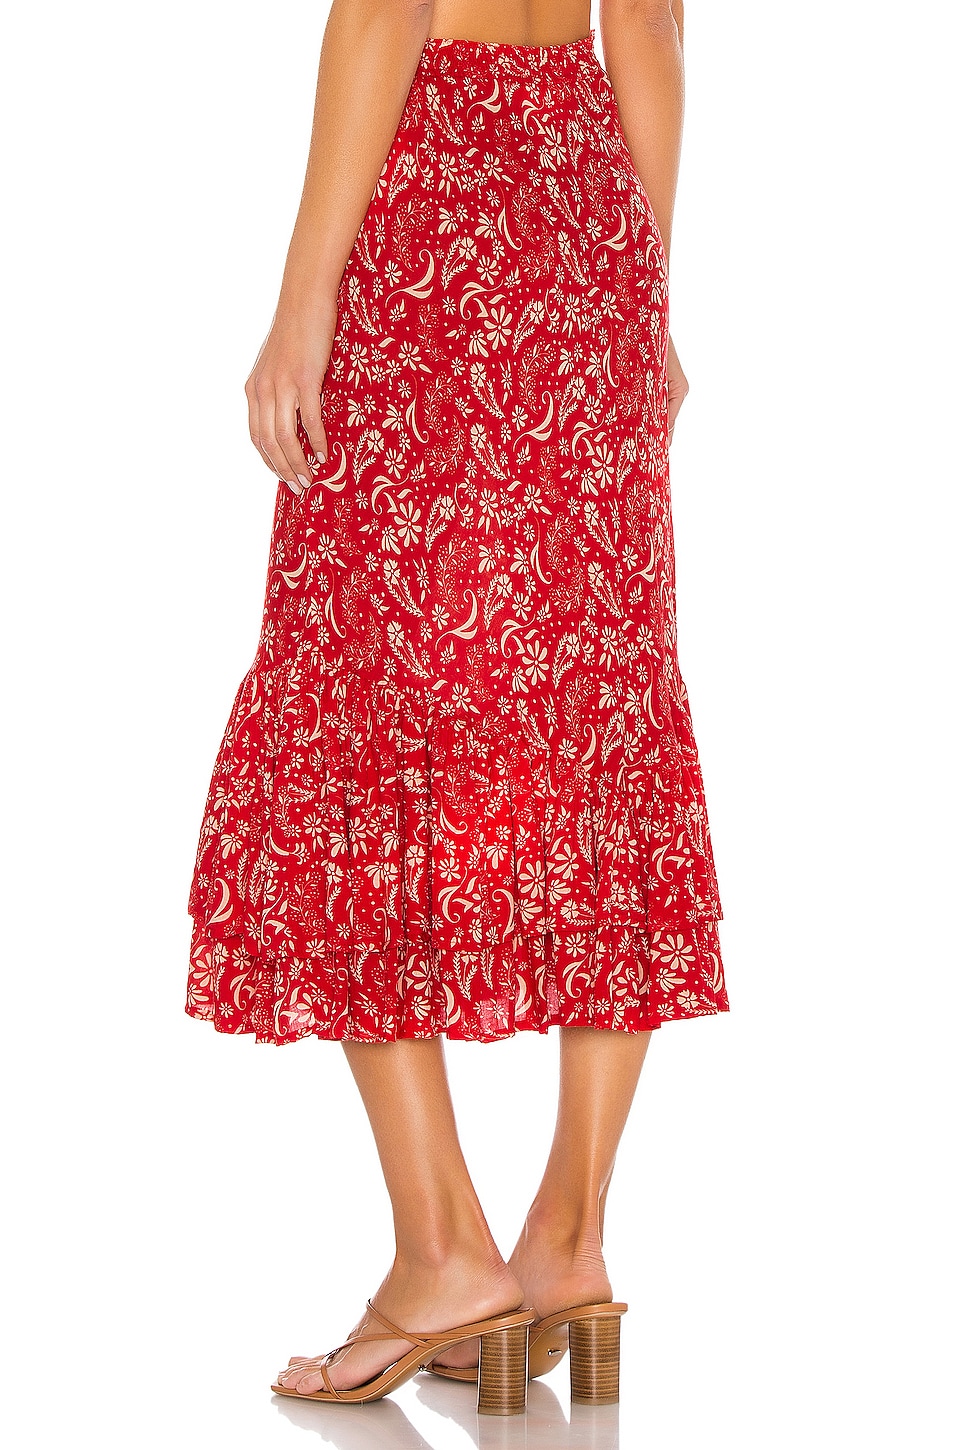 coolchange Florence Meadow Skirt in Flame & Buff | REVOLVE